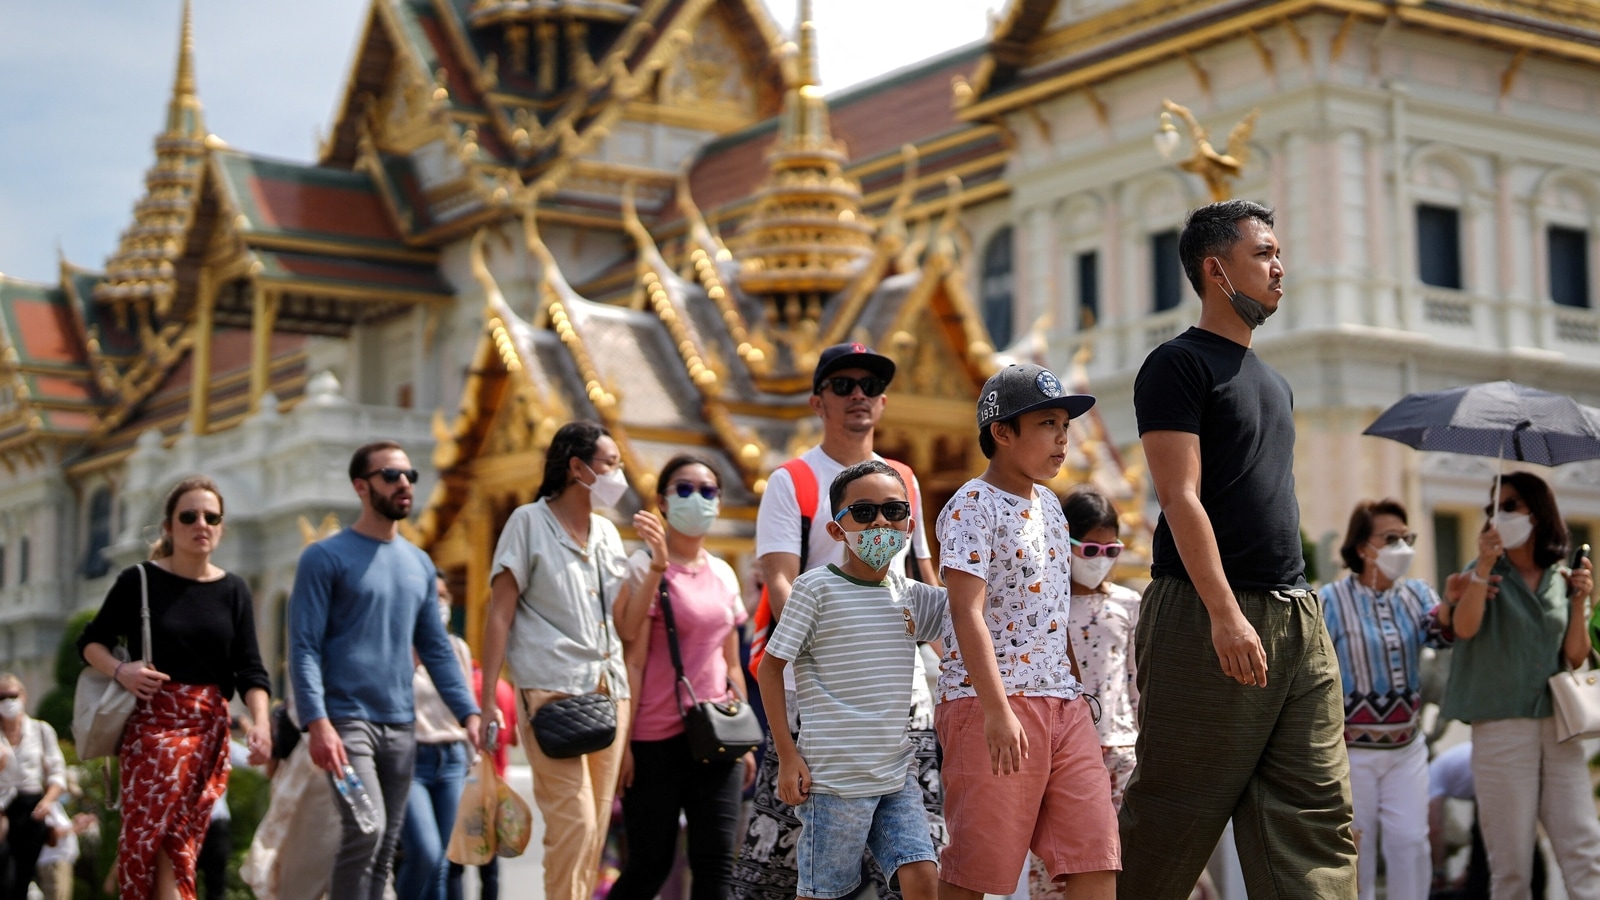 thailand travel vaccination requirements